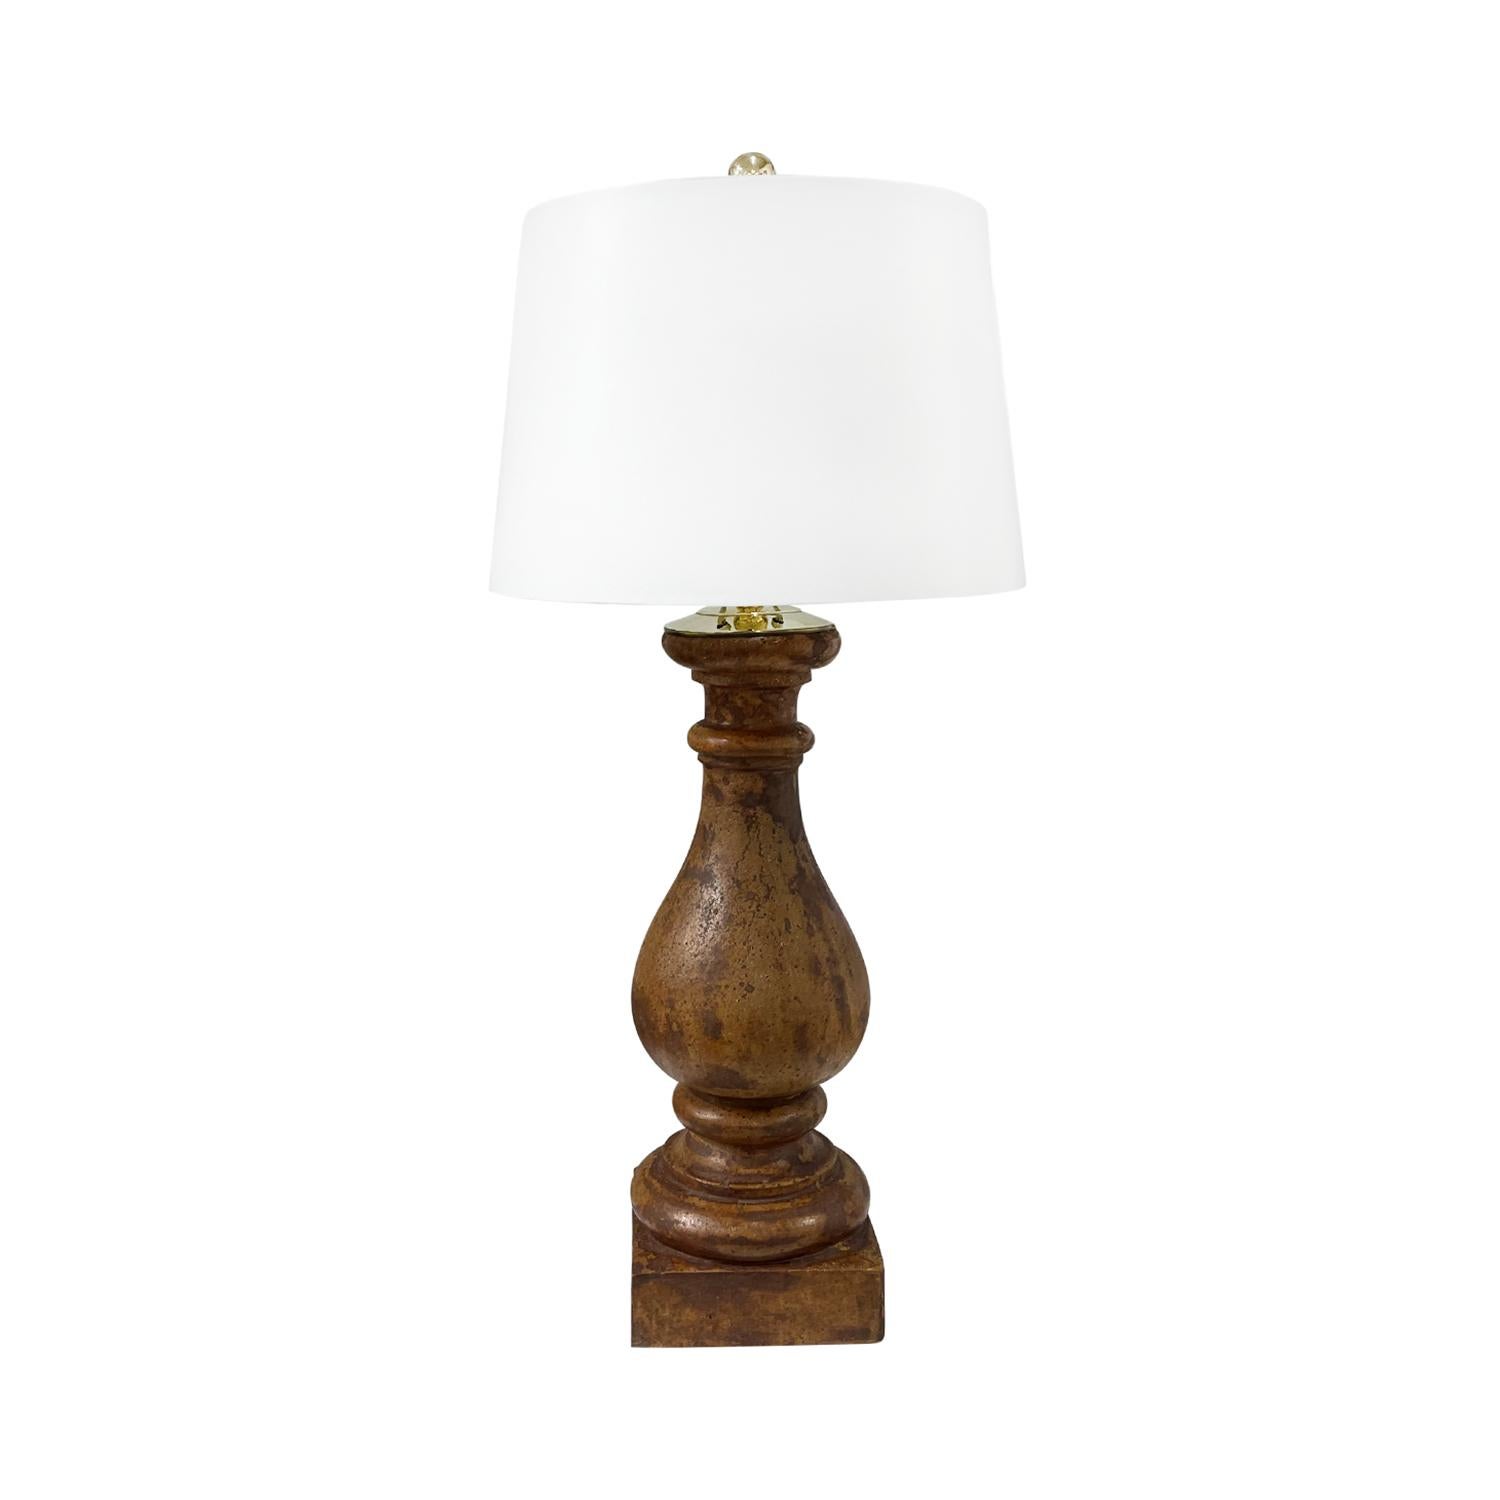 A brown-red, antique French pair of tall table lamps with a new white shade made of hand crafted stone, in good condition. The lights are detailed with a polished brass ring, featuring a one light socket. The wires have been renewed. Wear consistent